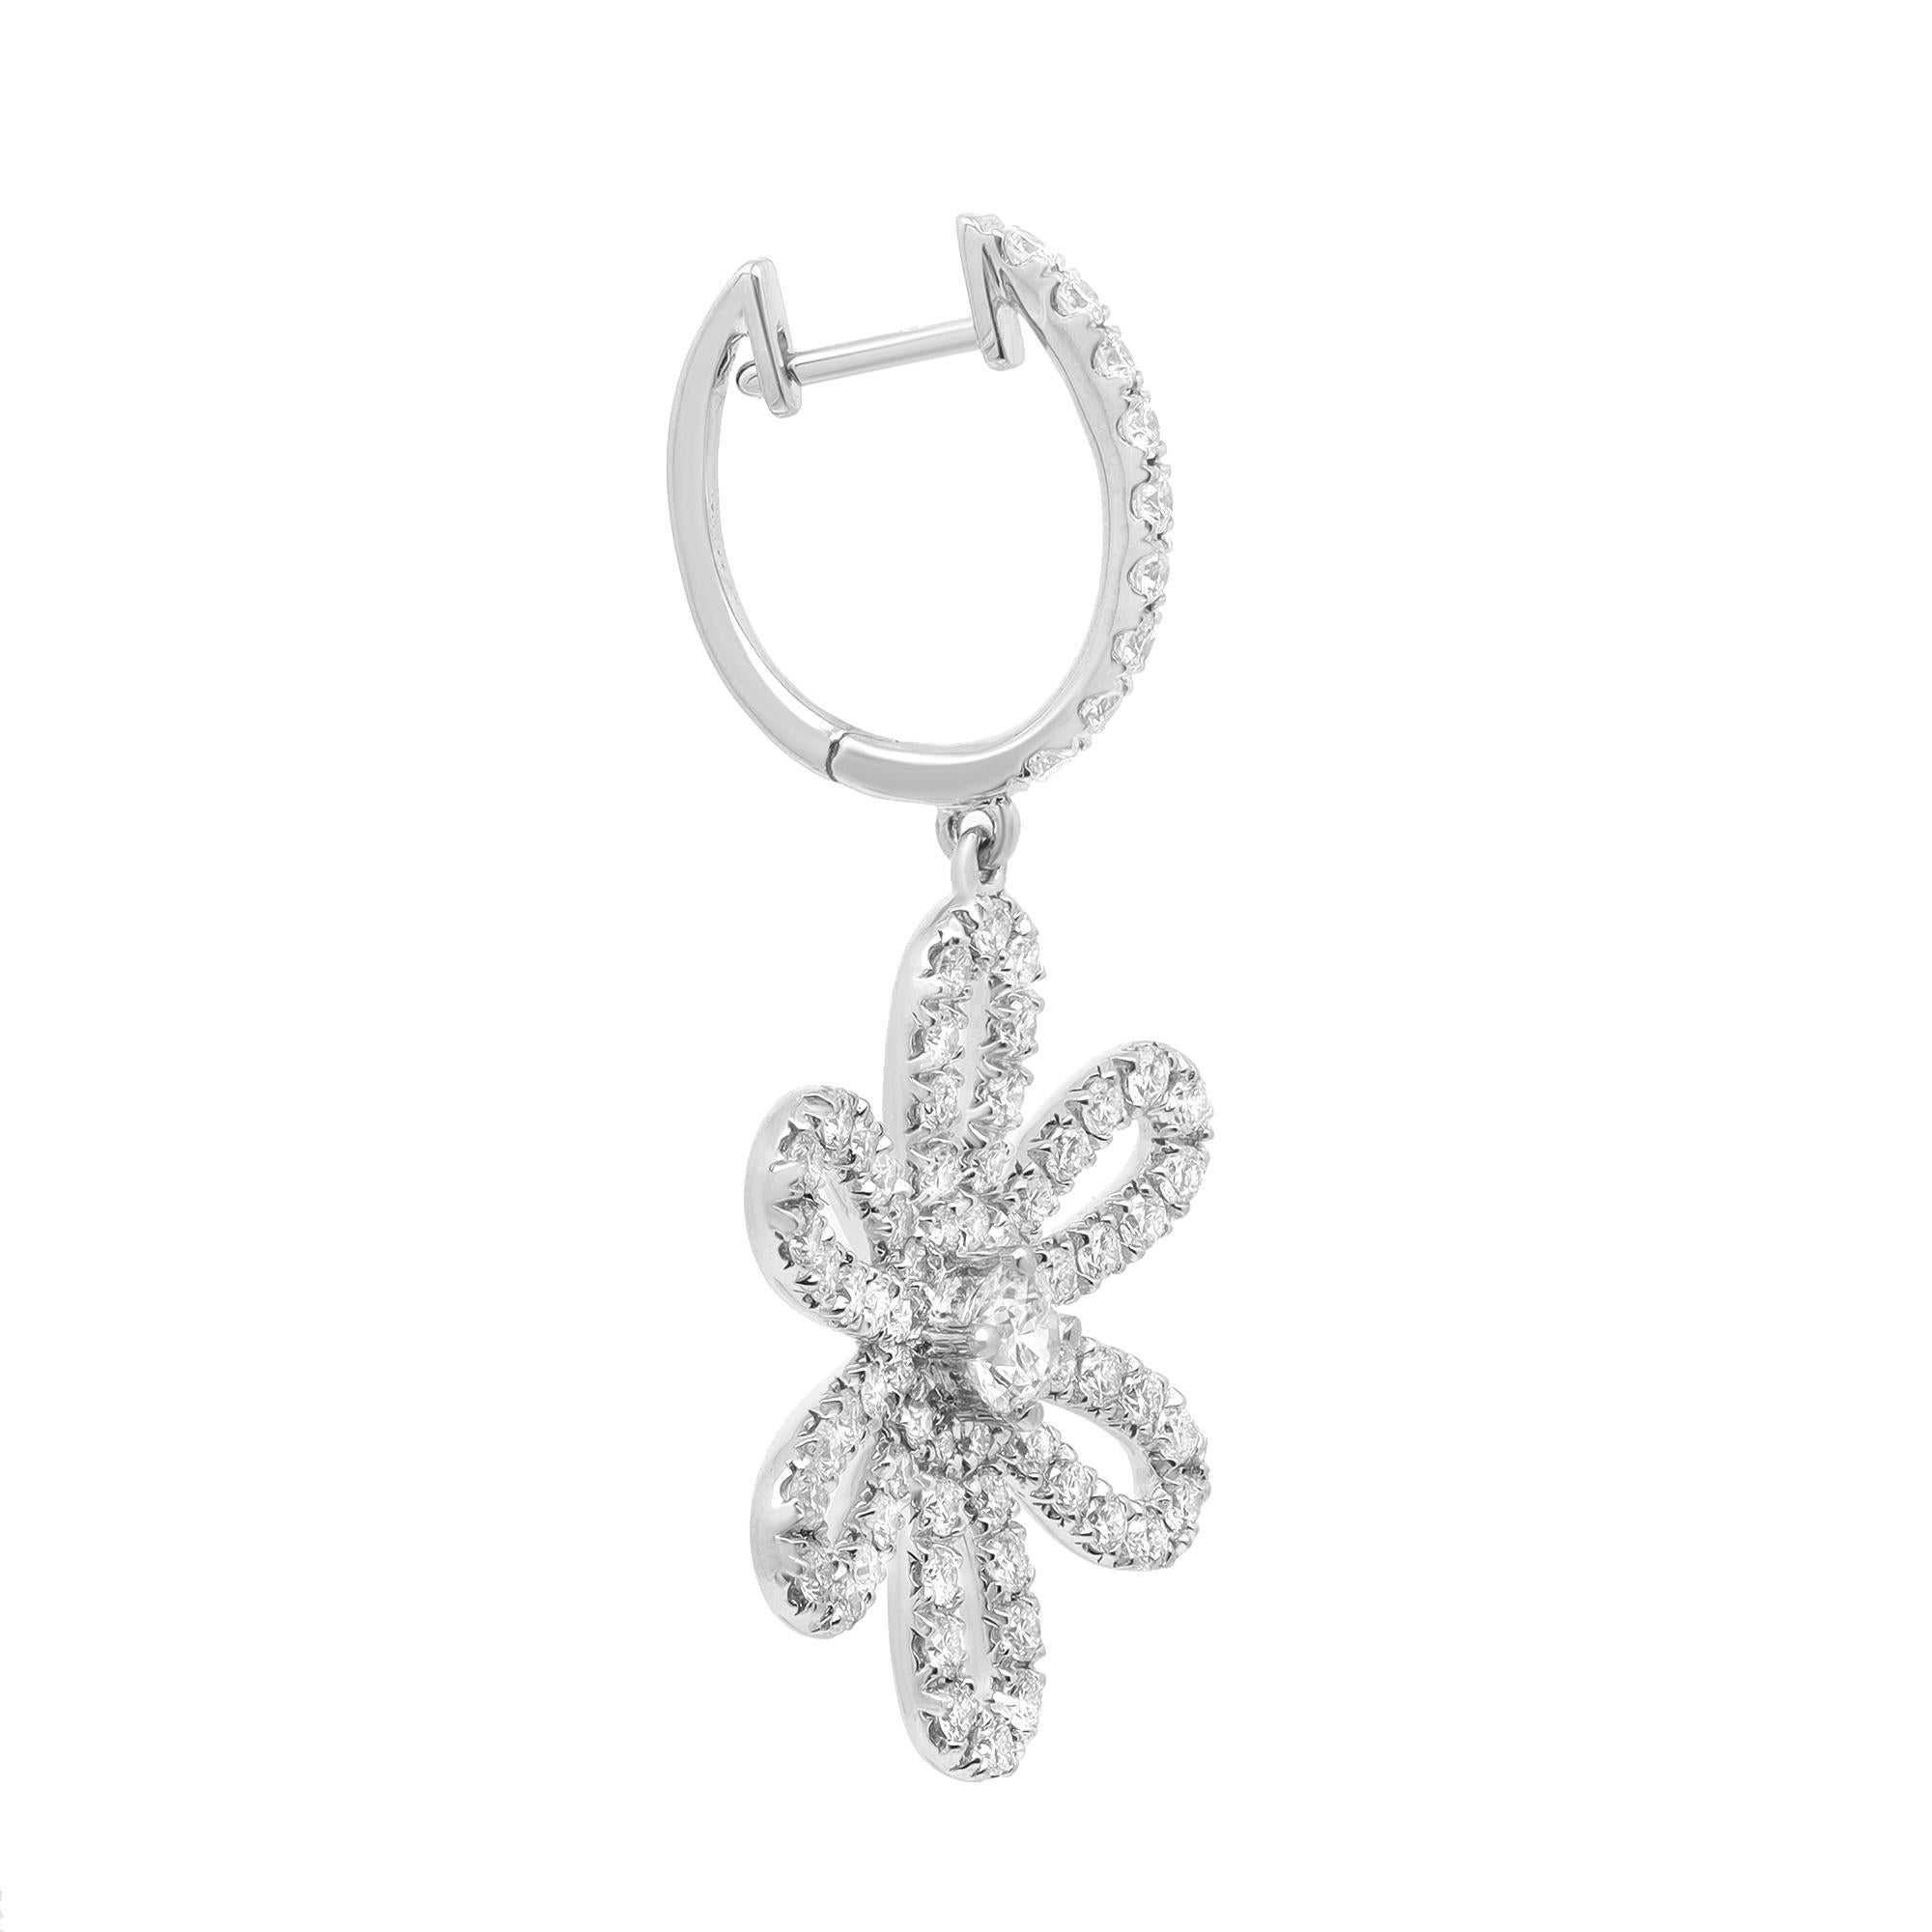 Diamonds in full bloom. These stunning diamond flower drop earrings are crafted in 18k white gold. Showcasing prong set round brilliant cut diamonds weighing 2.50 carats. Diamond quality: color G-H and clarity VS-SI. Earring length: 1.5 inches.